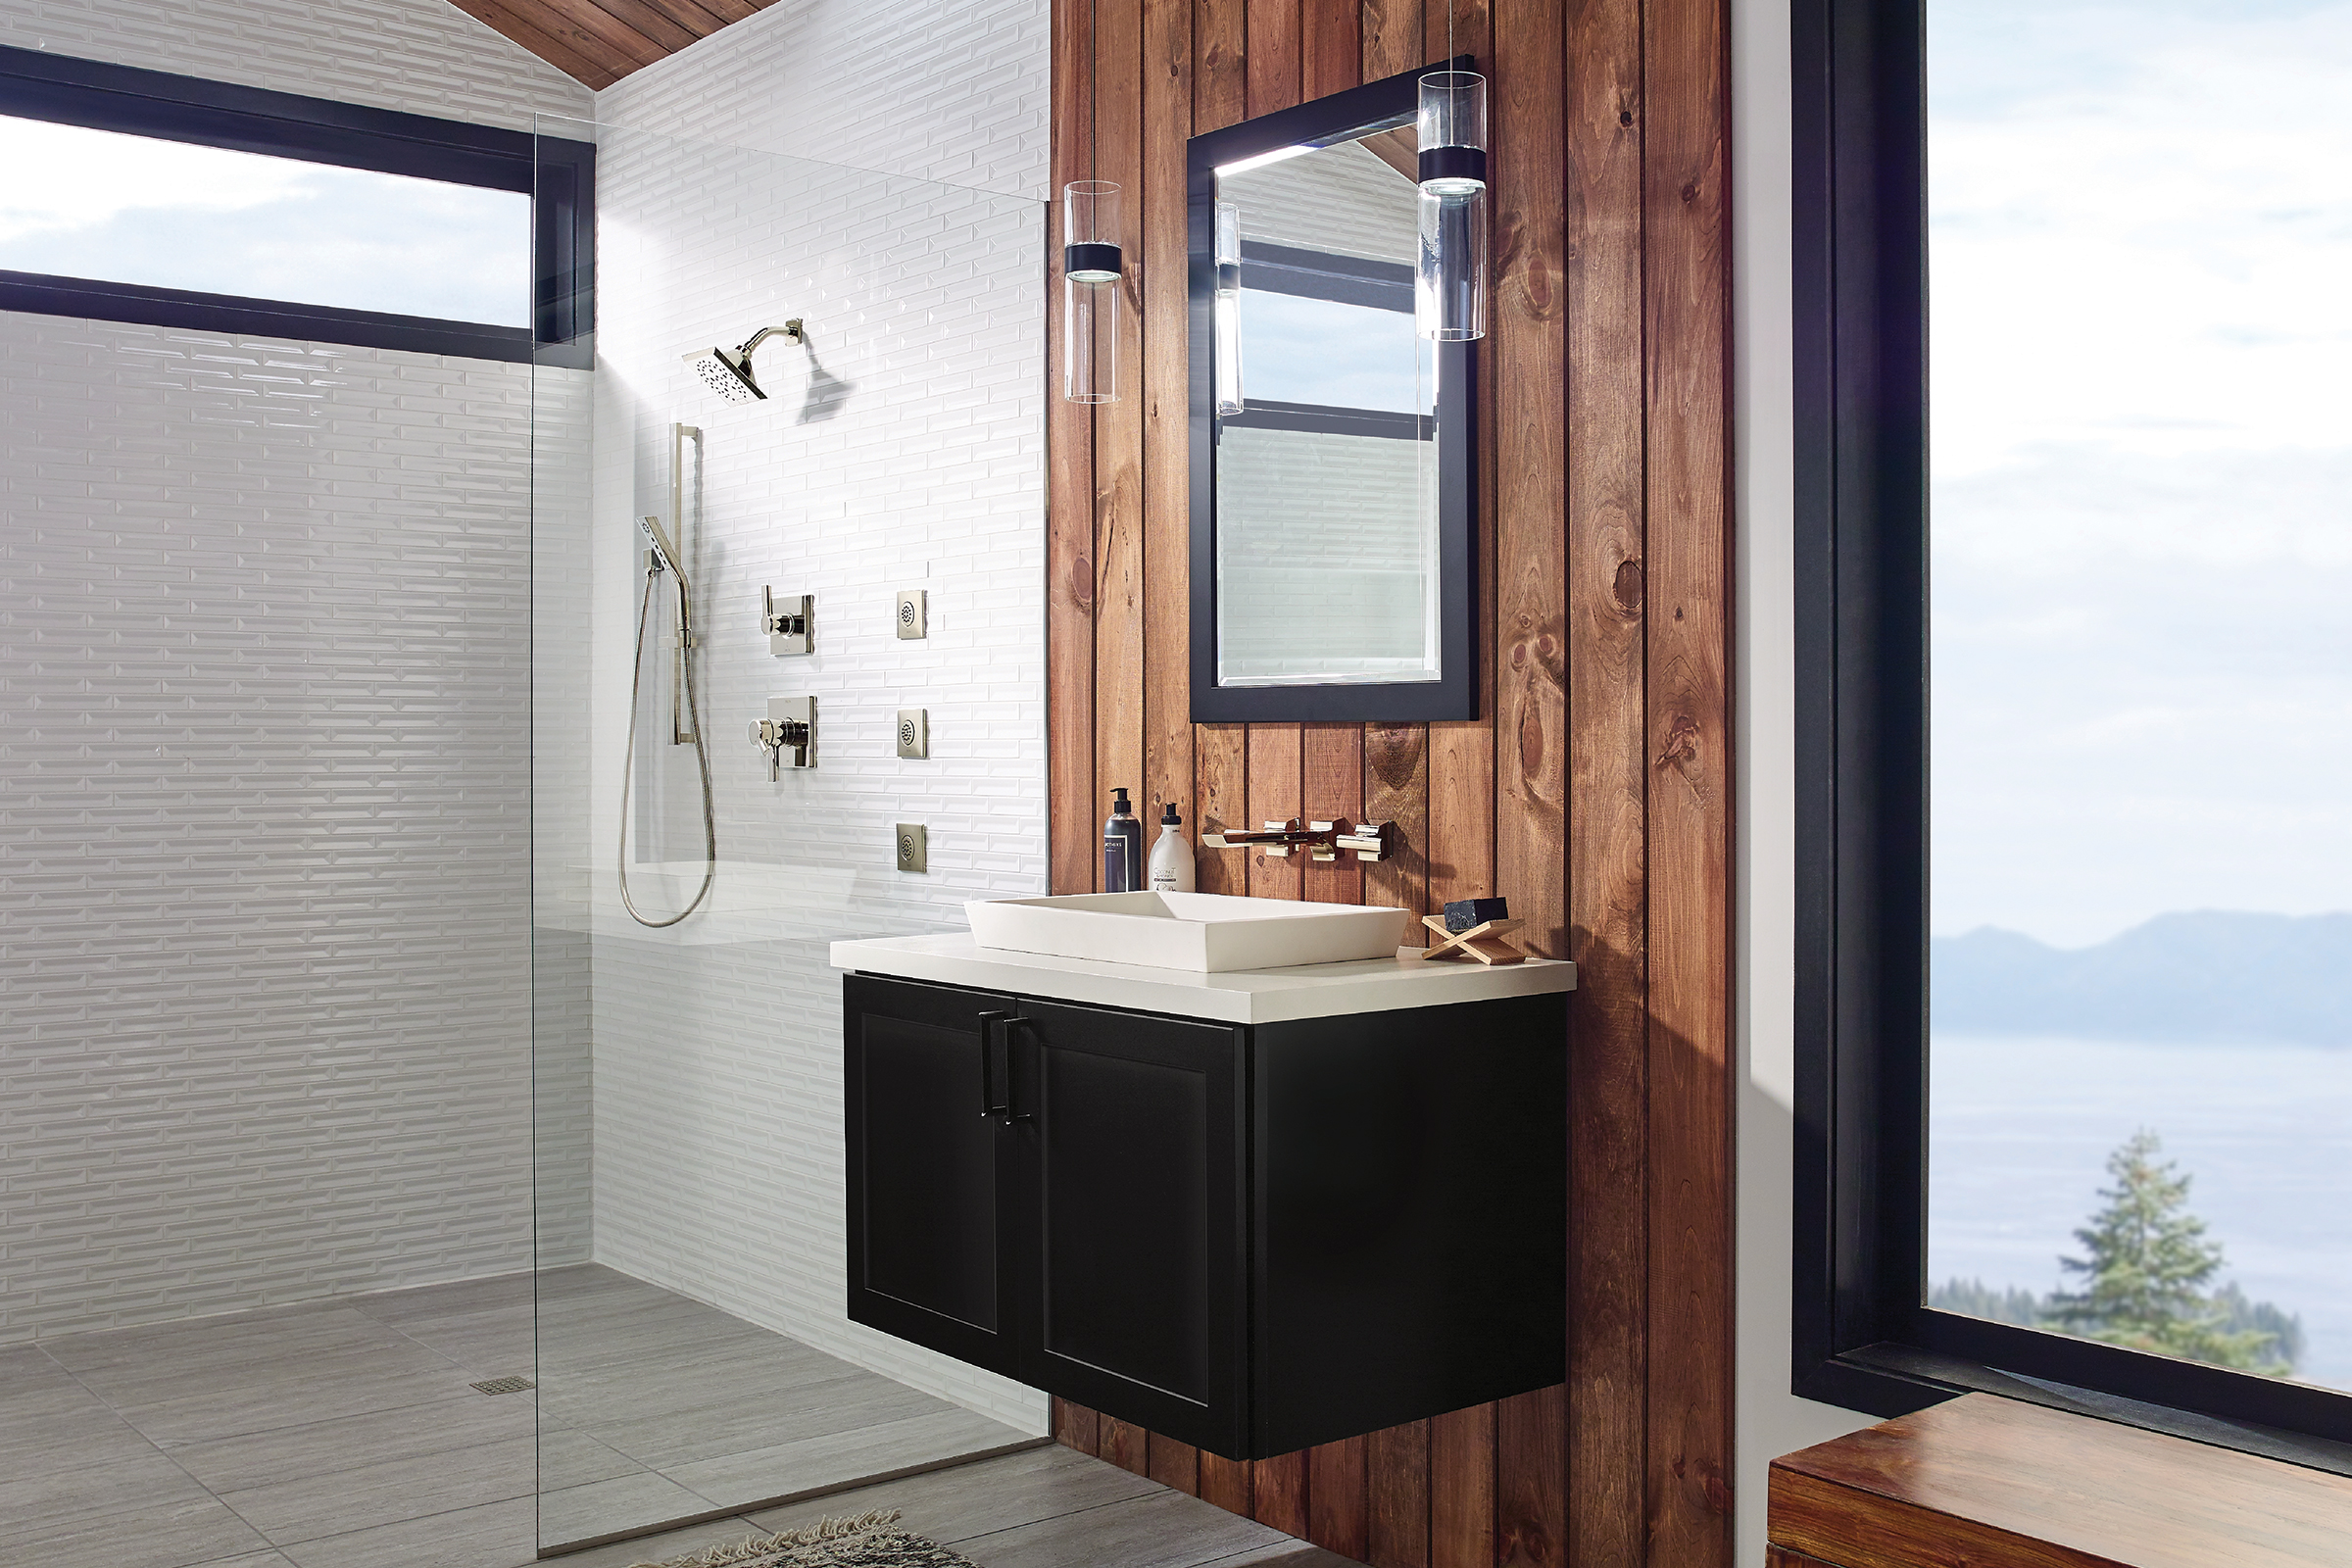 Bathroom Cabinet Care: How To Maintain Your Bathroom Cabinet?